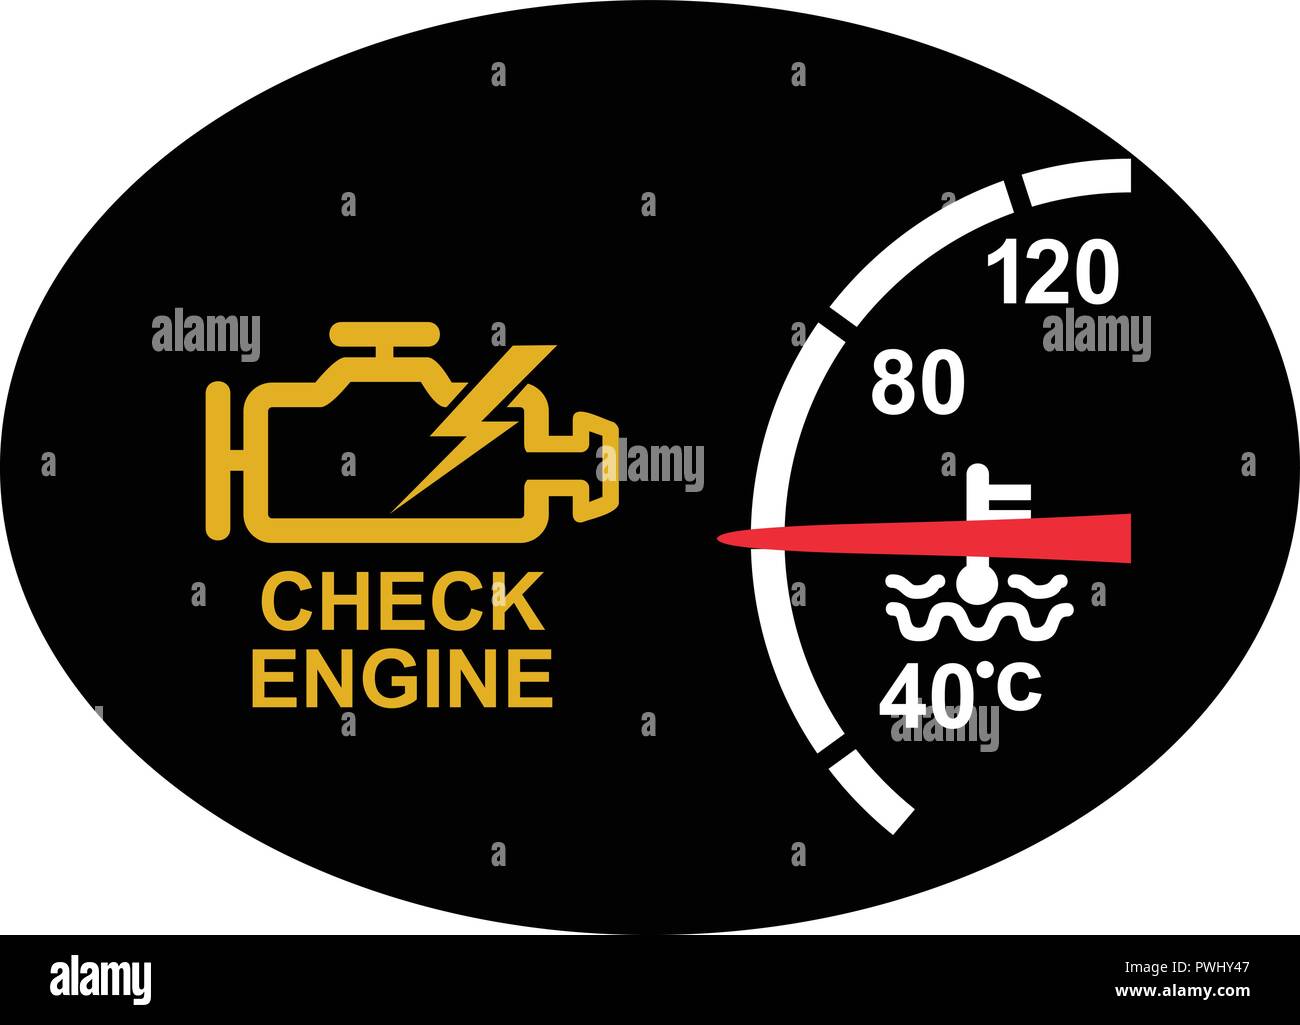 Icon retro style illustration of a dashboard with check engine sign or symbol warning  and temperature gauge on black oval on isolated background. Stock Vector